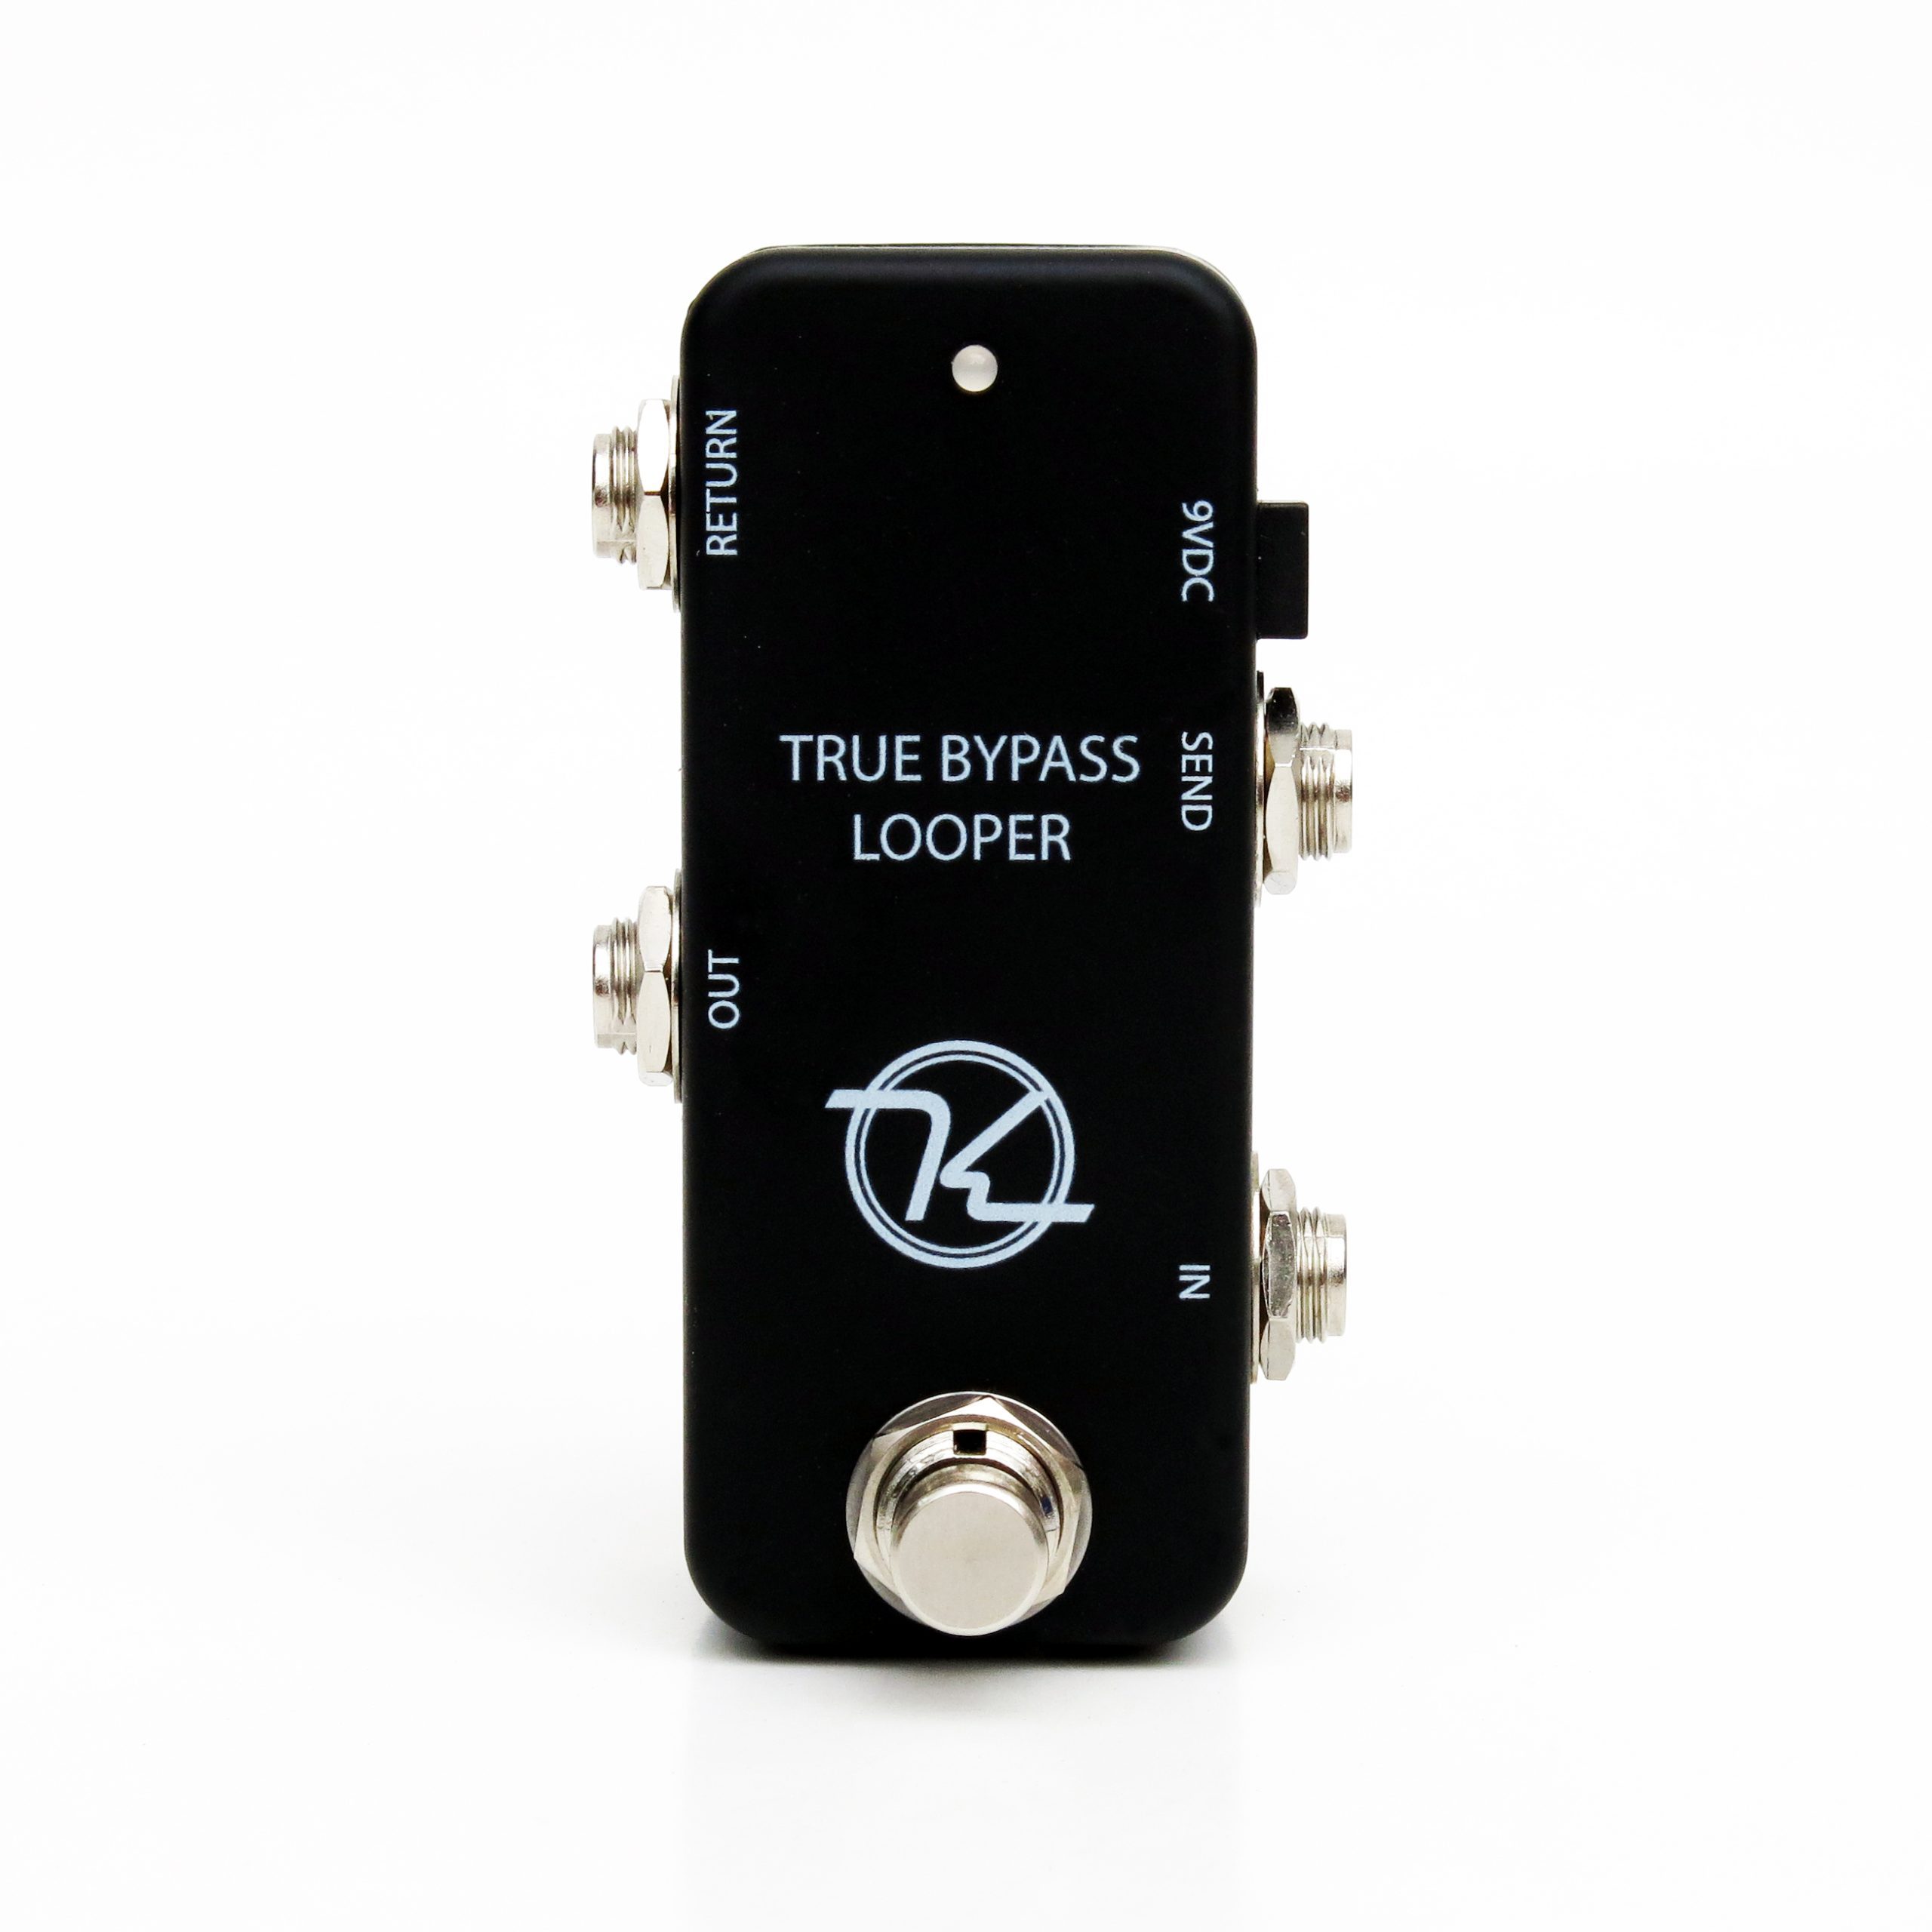 True Bypass Multi Loopers